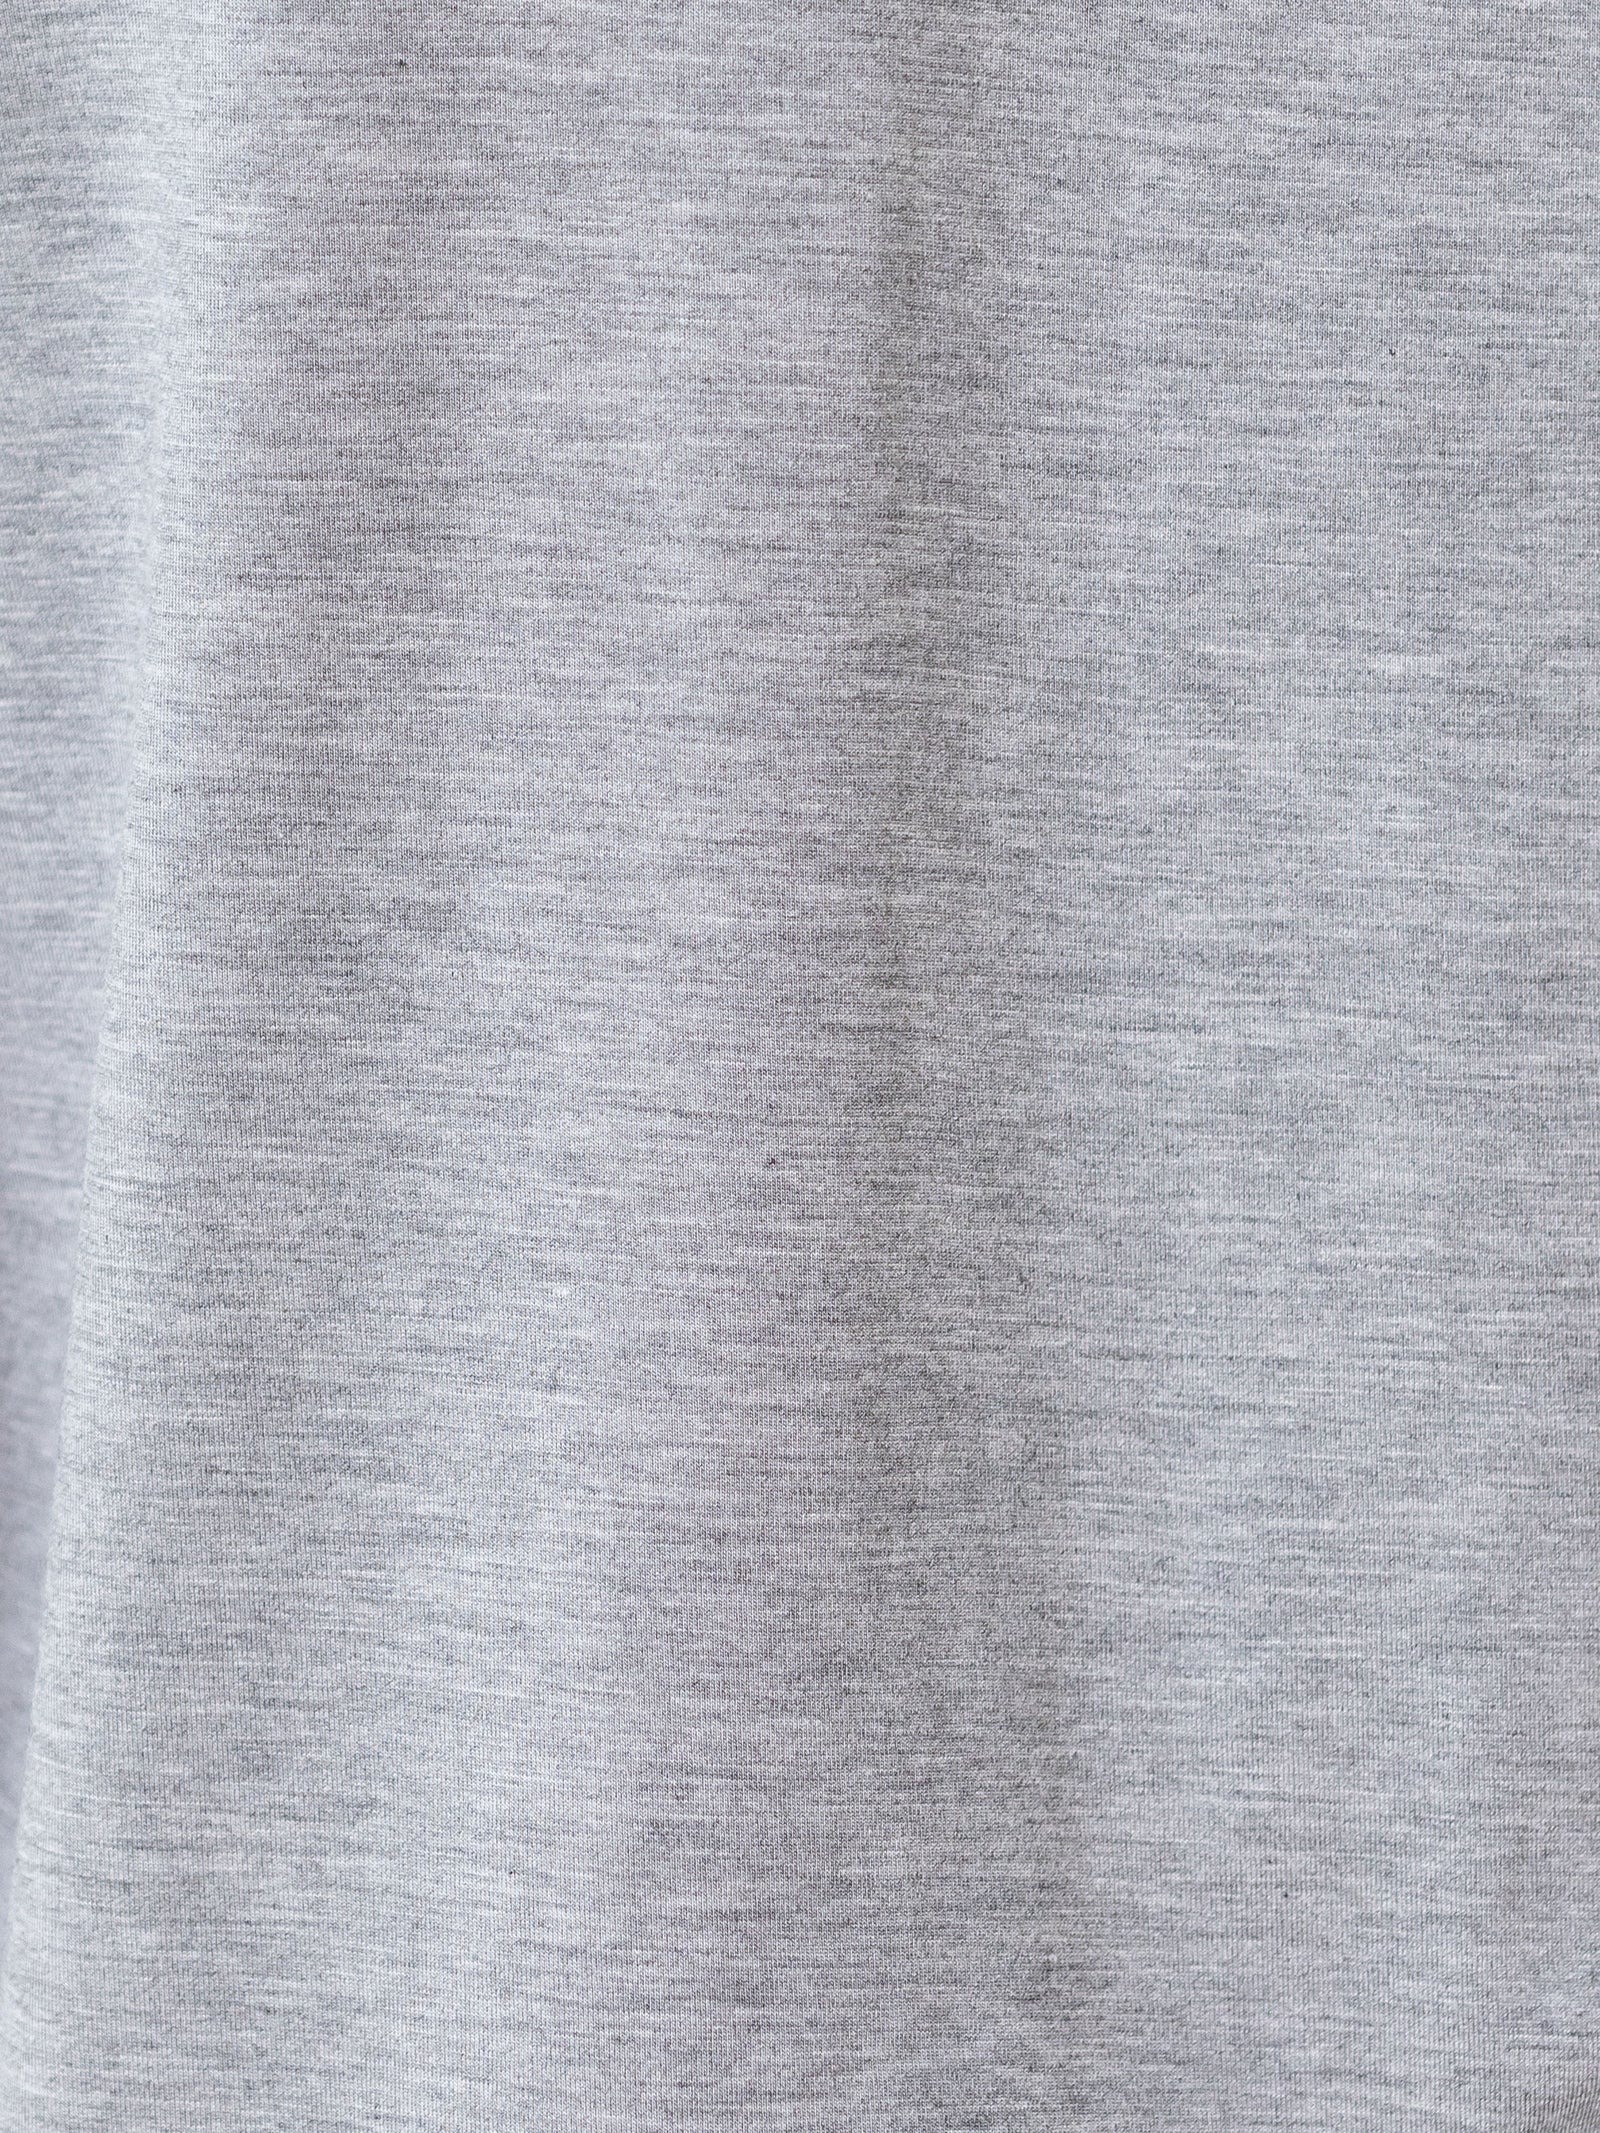 Grey Long Sleeve Pajama Set. The photo was taken close up, showing off the print of the pajamas. 